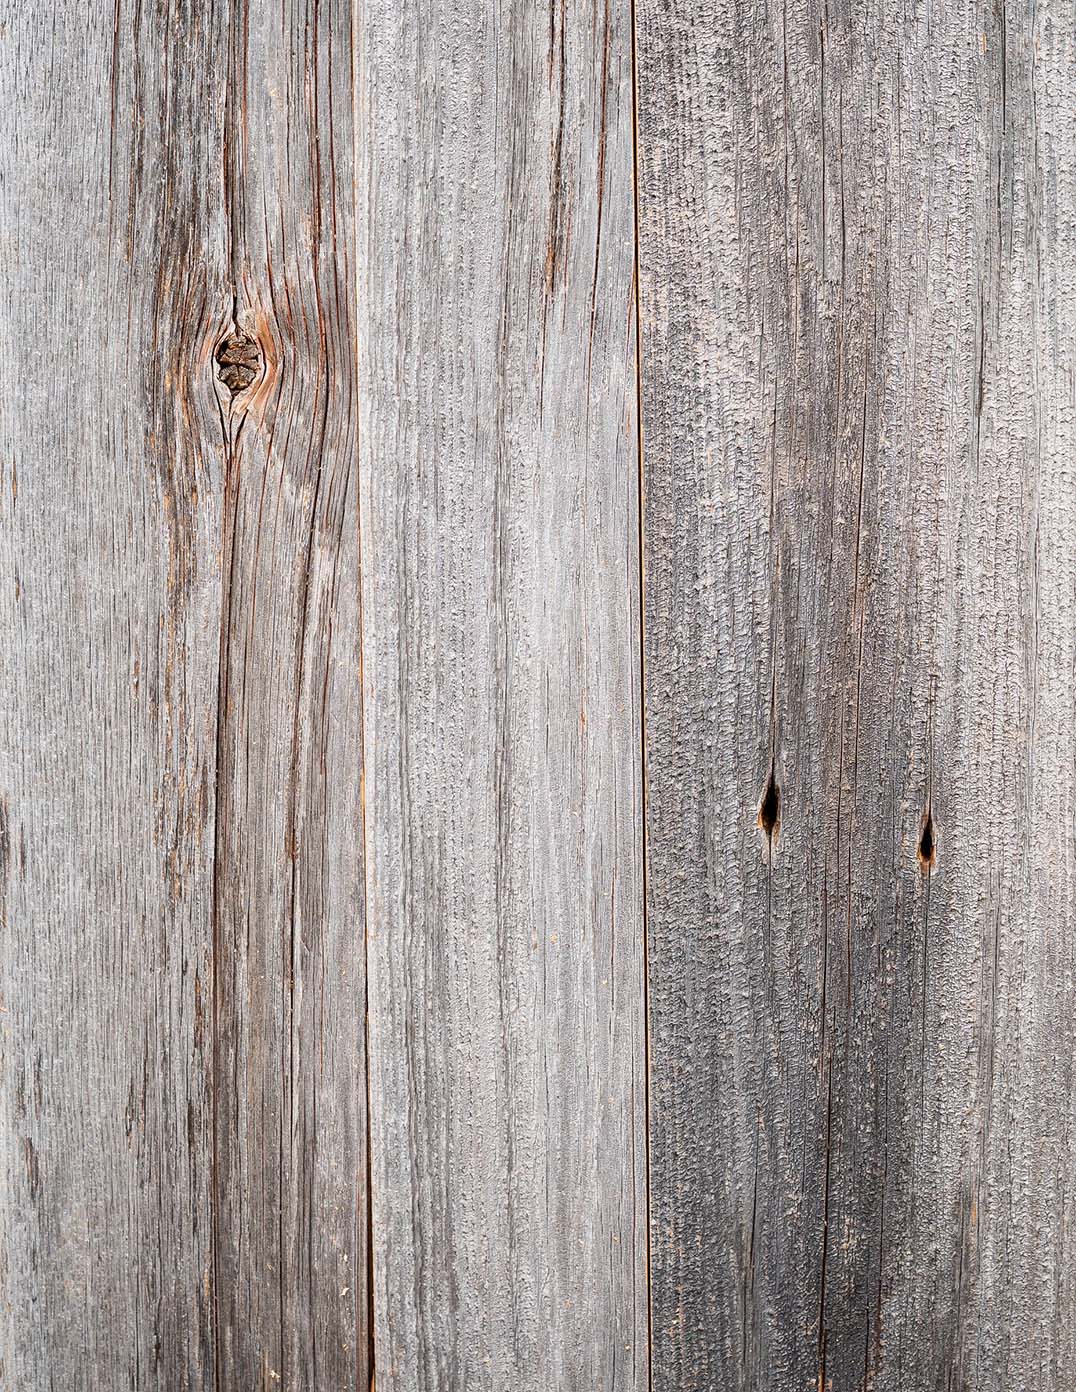 close up of weathered grey barnwood paneling. Shows color variations, texture, knots, and nail holes in the wood.